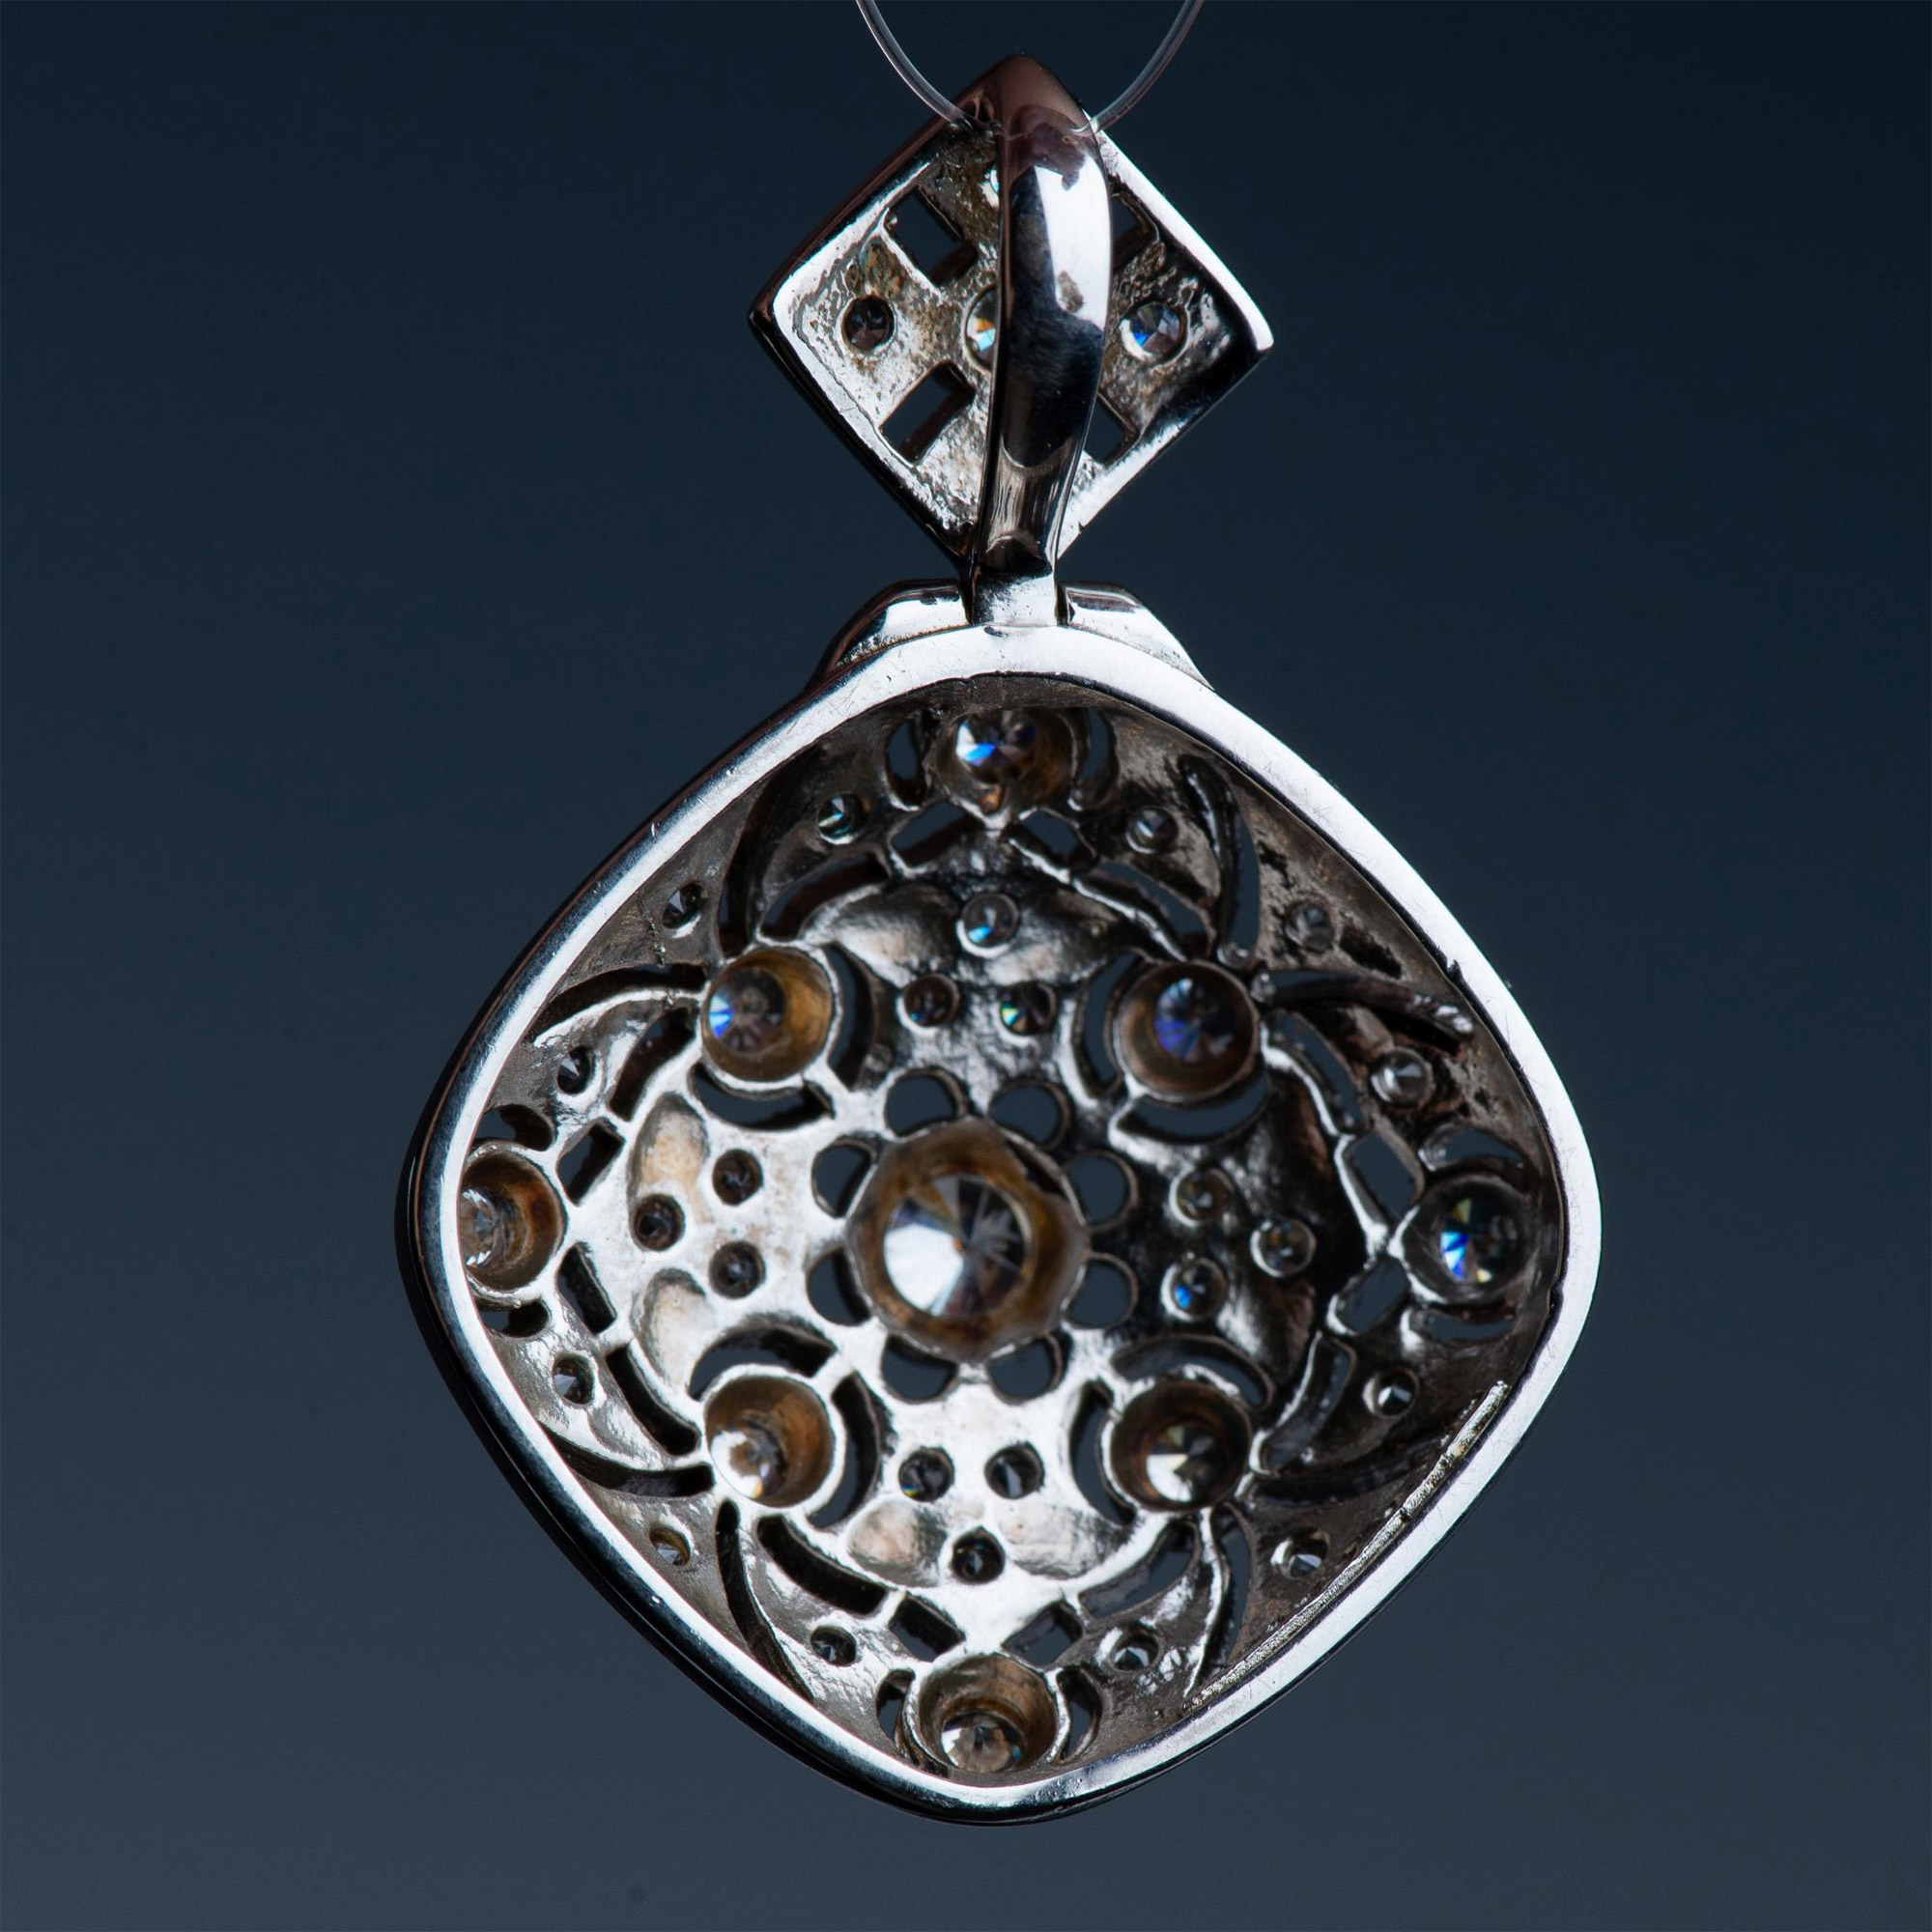 Gorgeous Ornate Sterling Silver Filigree & CZ Pendant - Image 2 of 5